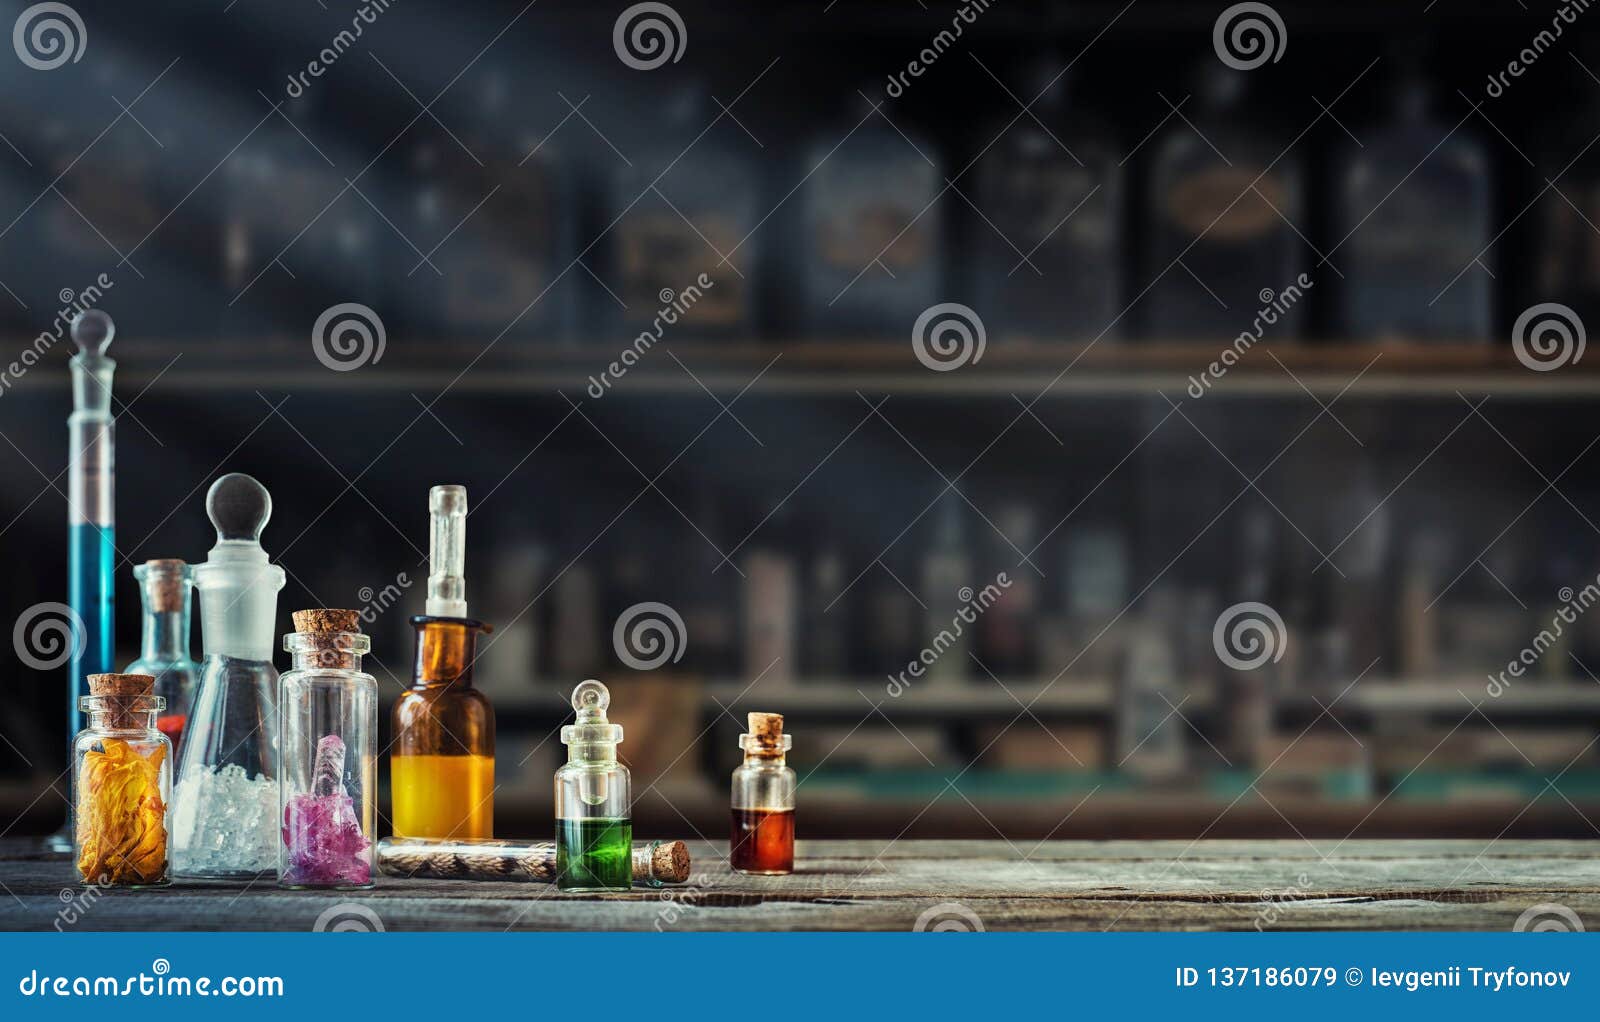 vintage medications in small bottles on wood desk. old medical, chemistry and pharmacy history concept background.